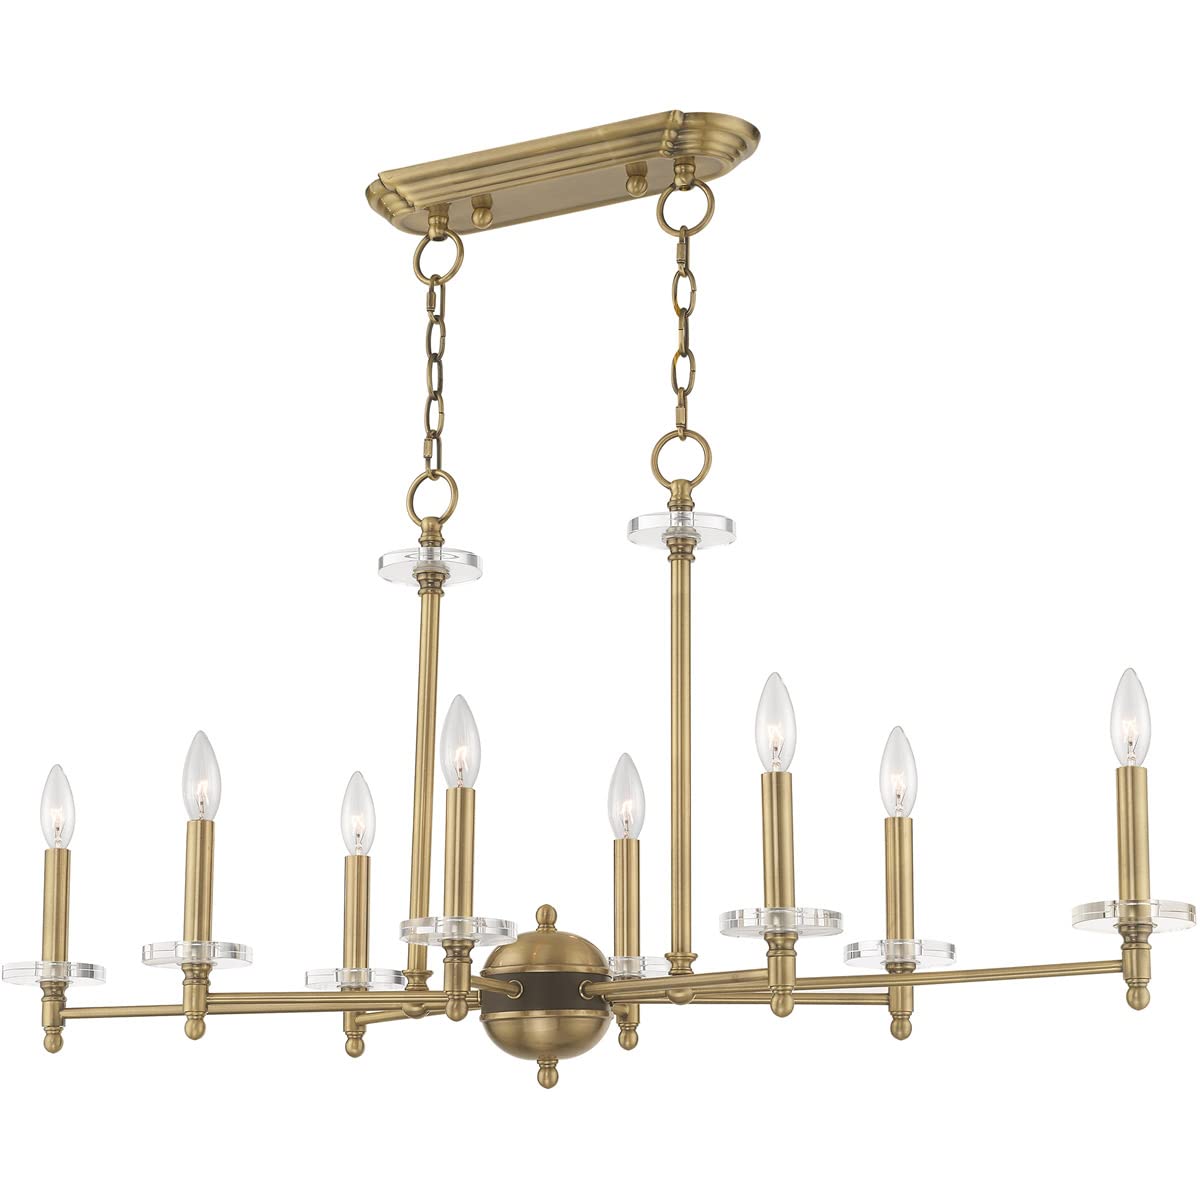 Livex Lighting 42708-01 Bancroft - Eight Light Linear Chandelier, Antique Brass Finish with Clear Bobeche Crystal